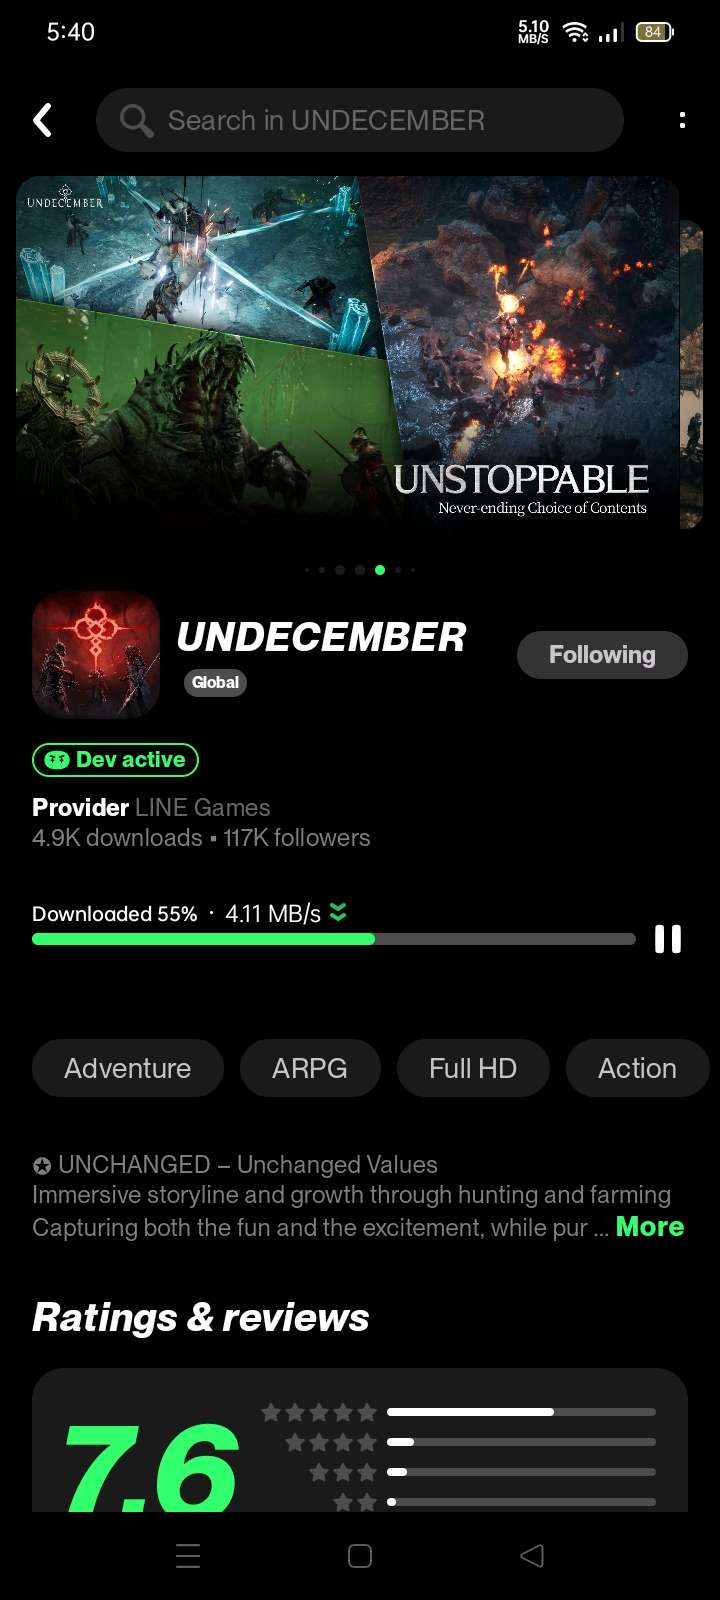 Qoo News] UNDECEMBER Hack & Slash Game Coming to Mobile & PC